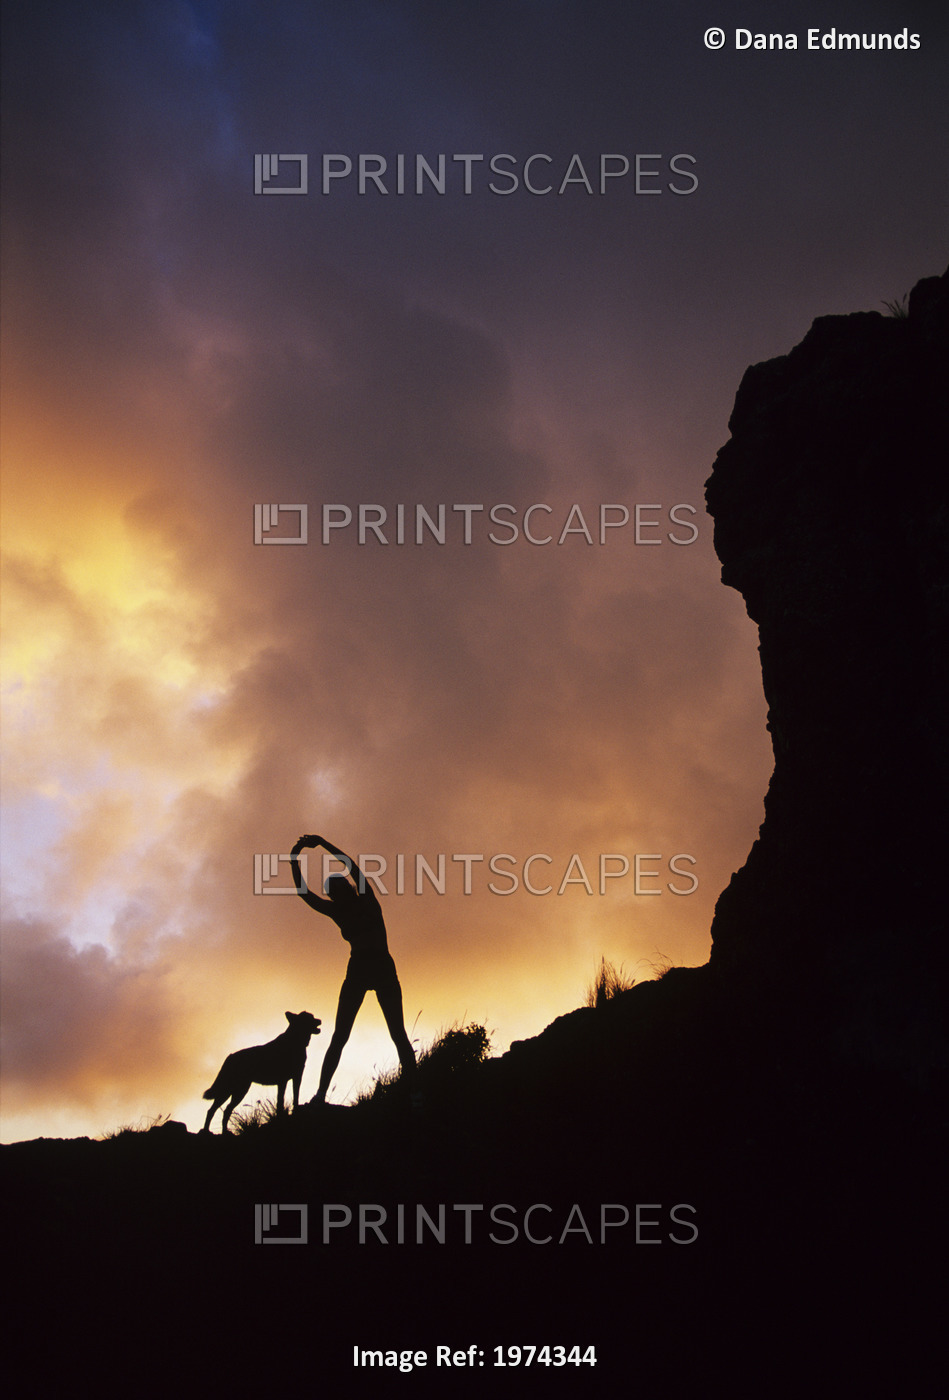 Hawaii, Silhouette Of A Woman Stretching On A Mountain Top At Sunset.